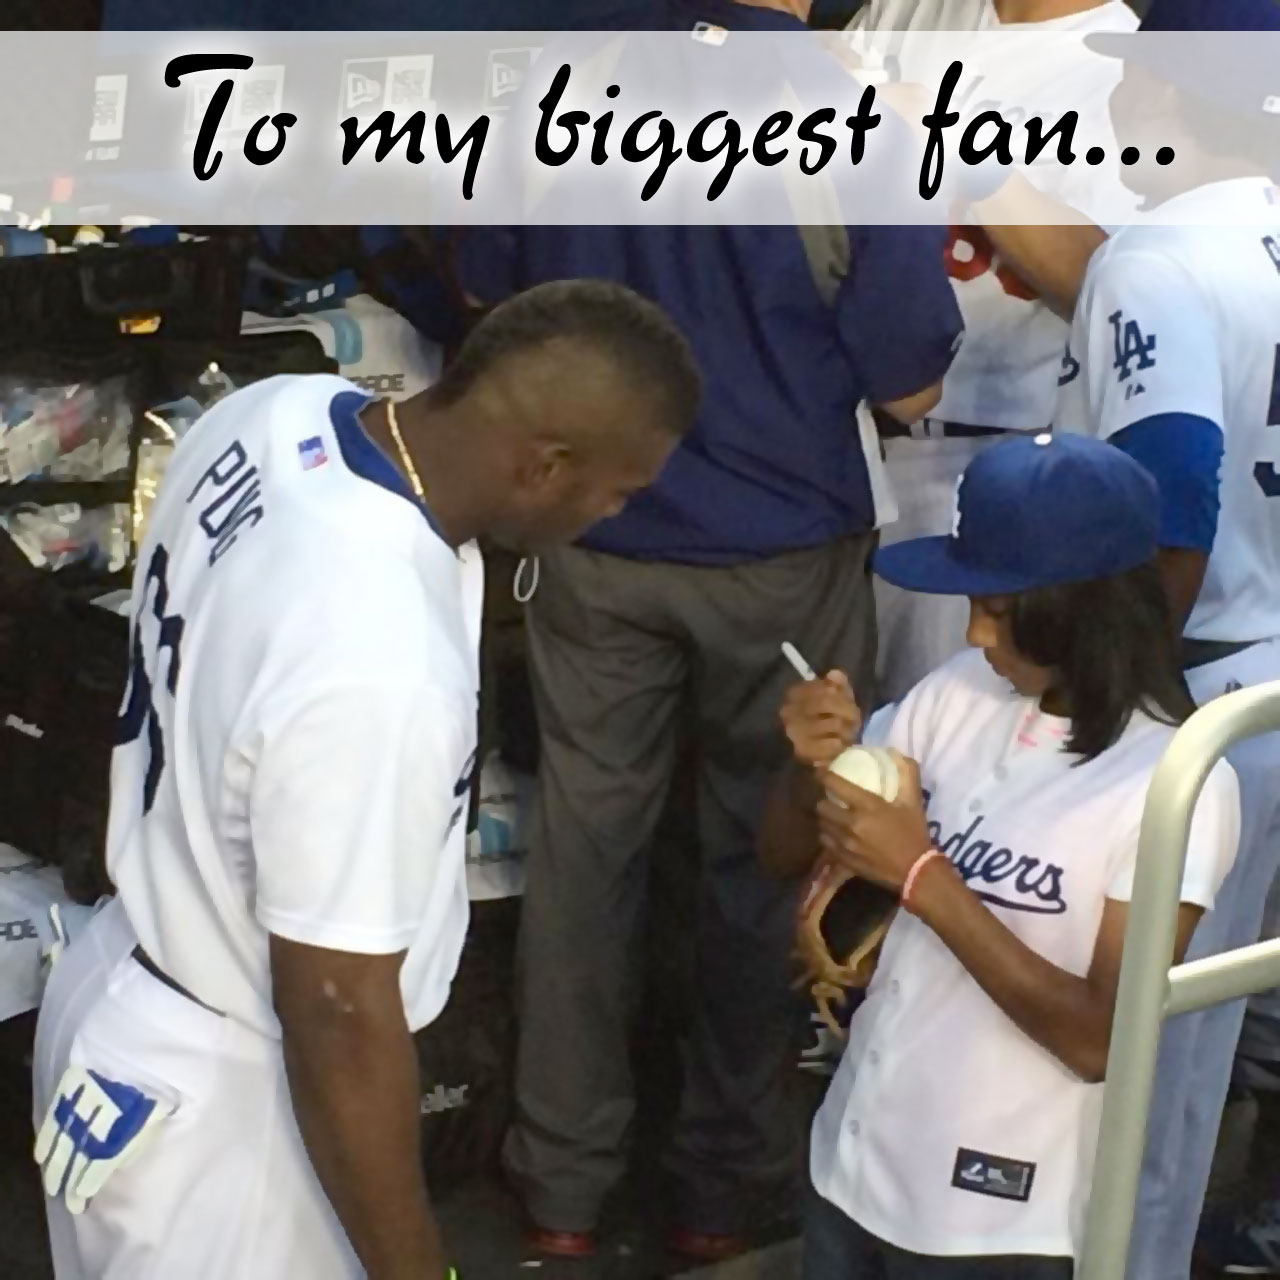 Mo'Ne Davis Signs a ball for Yasiel Puig in the Dodgers dugout.